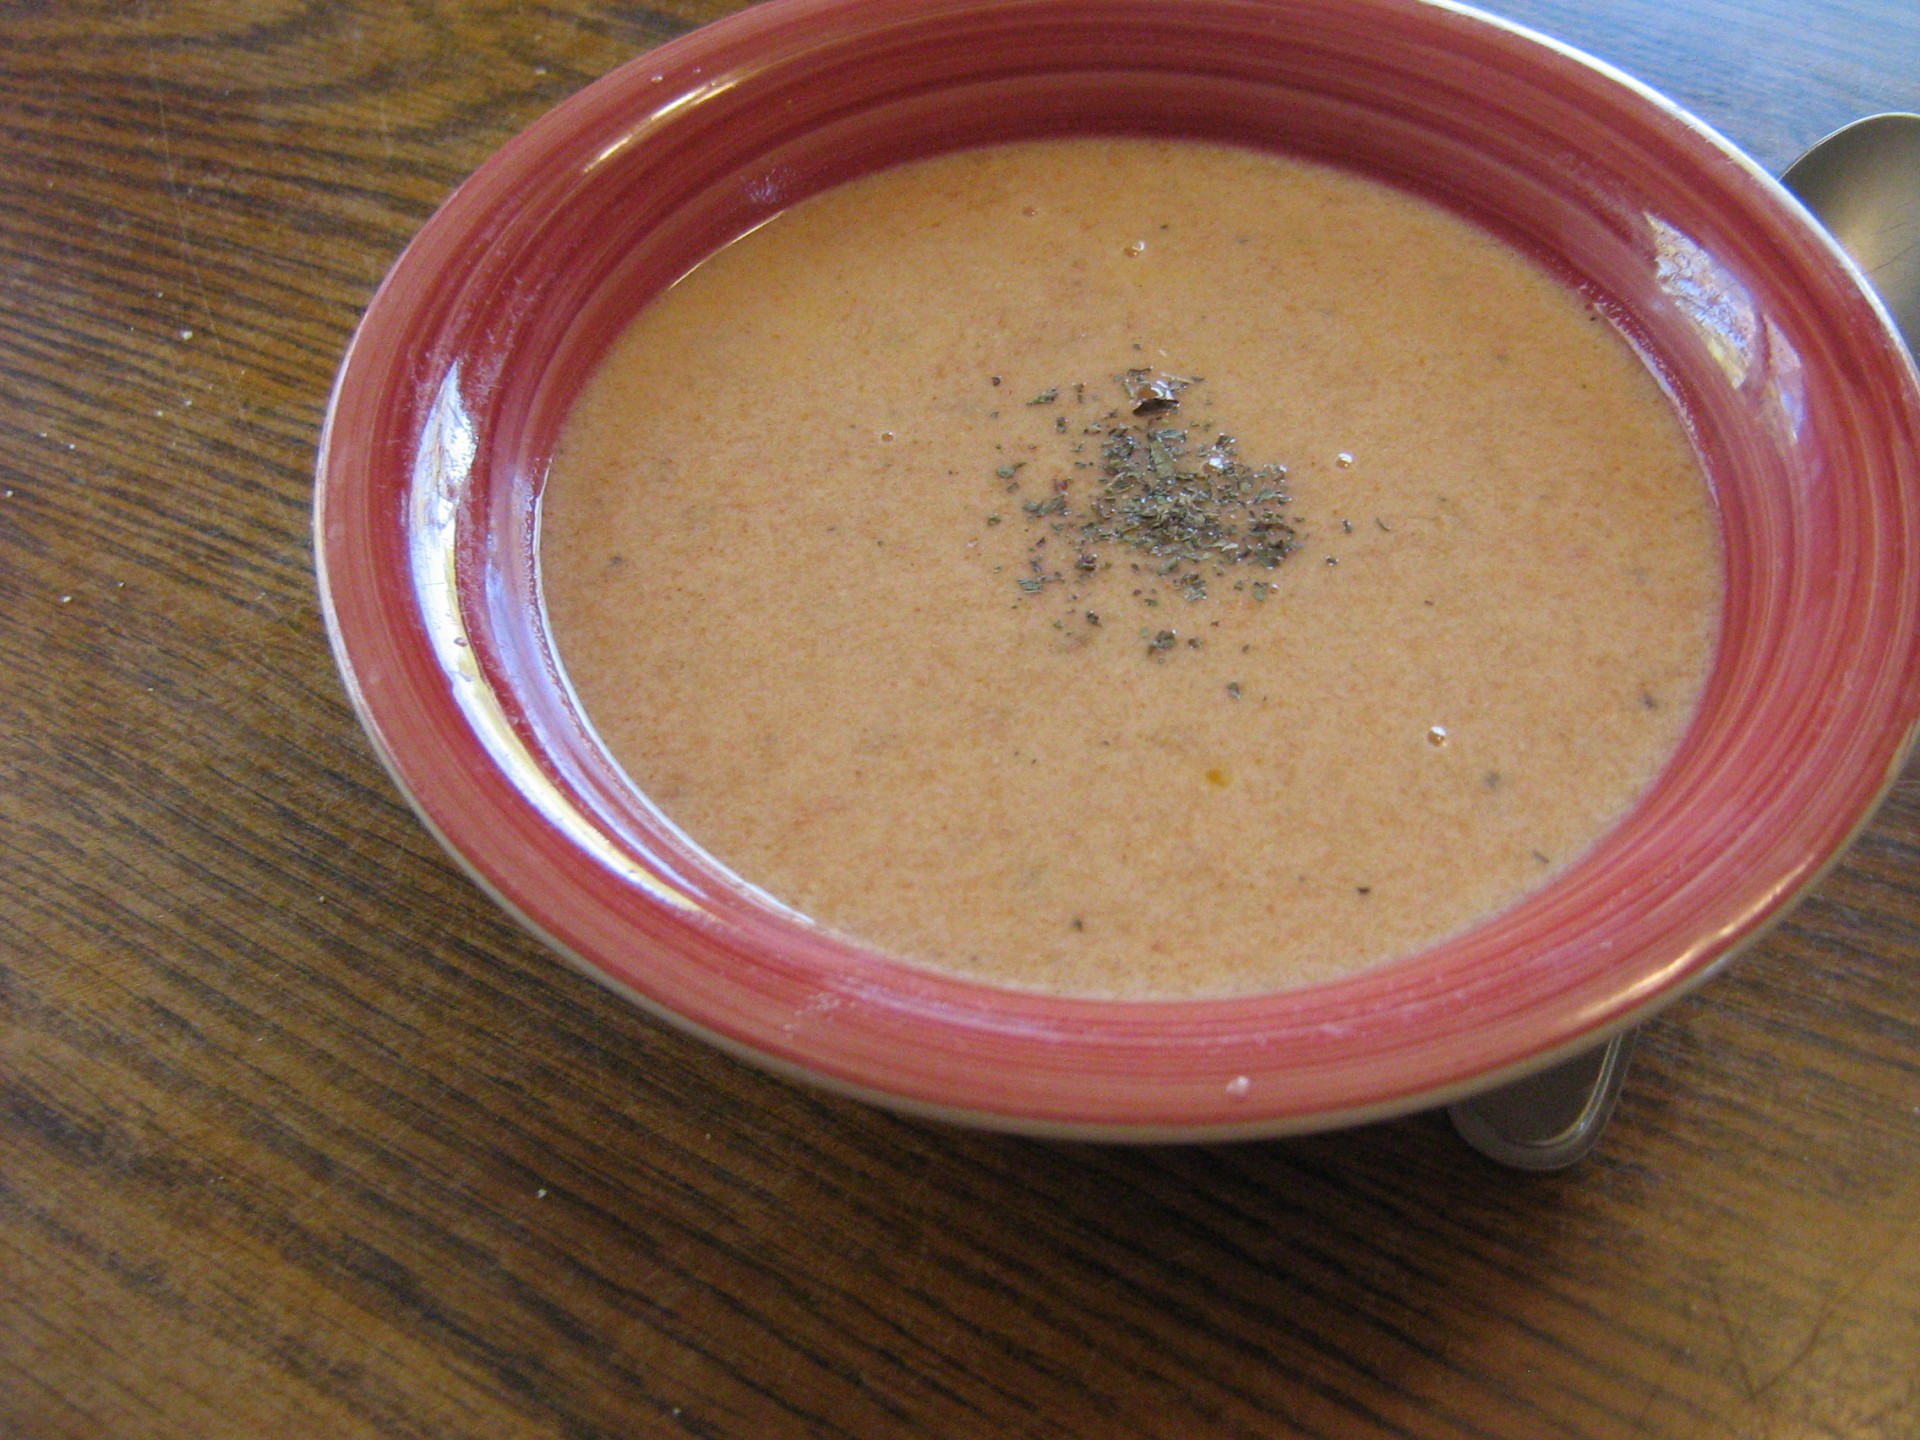 Roasted-Tomato Soup With Parmesan Wafers